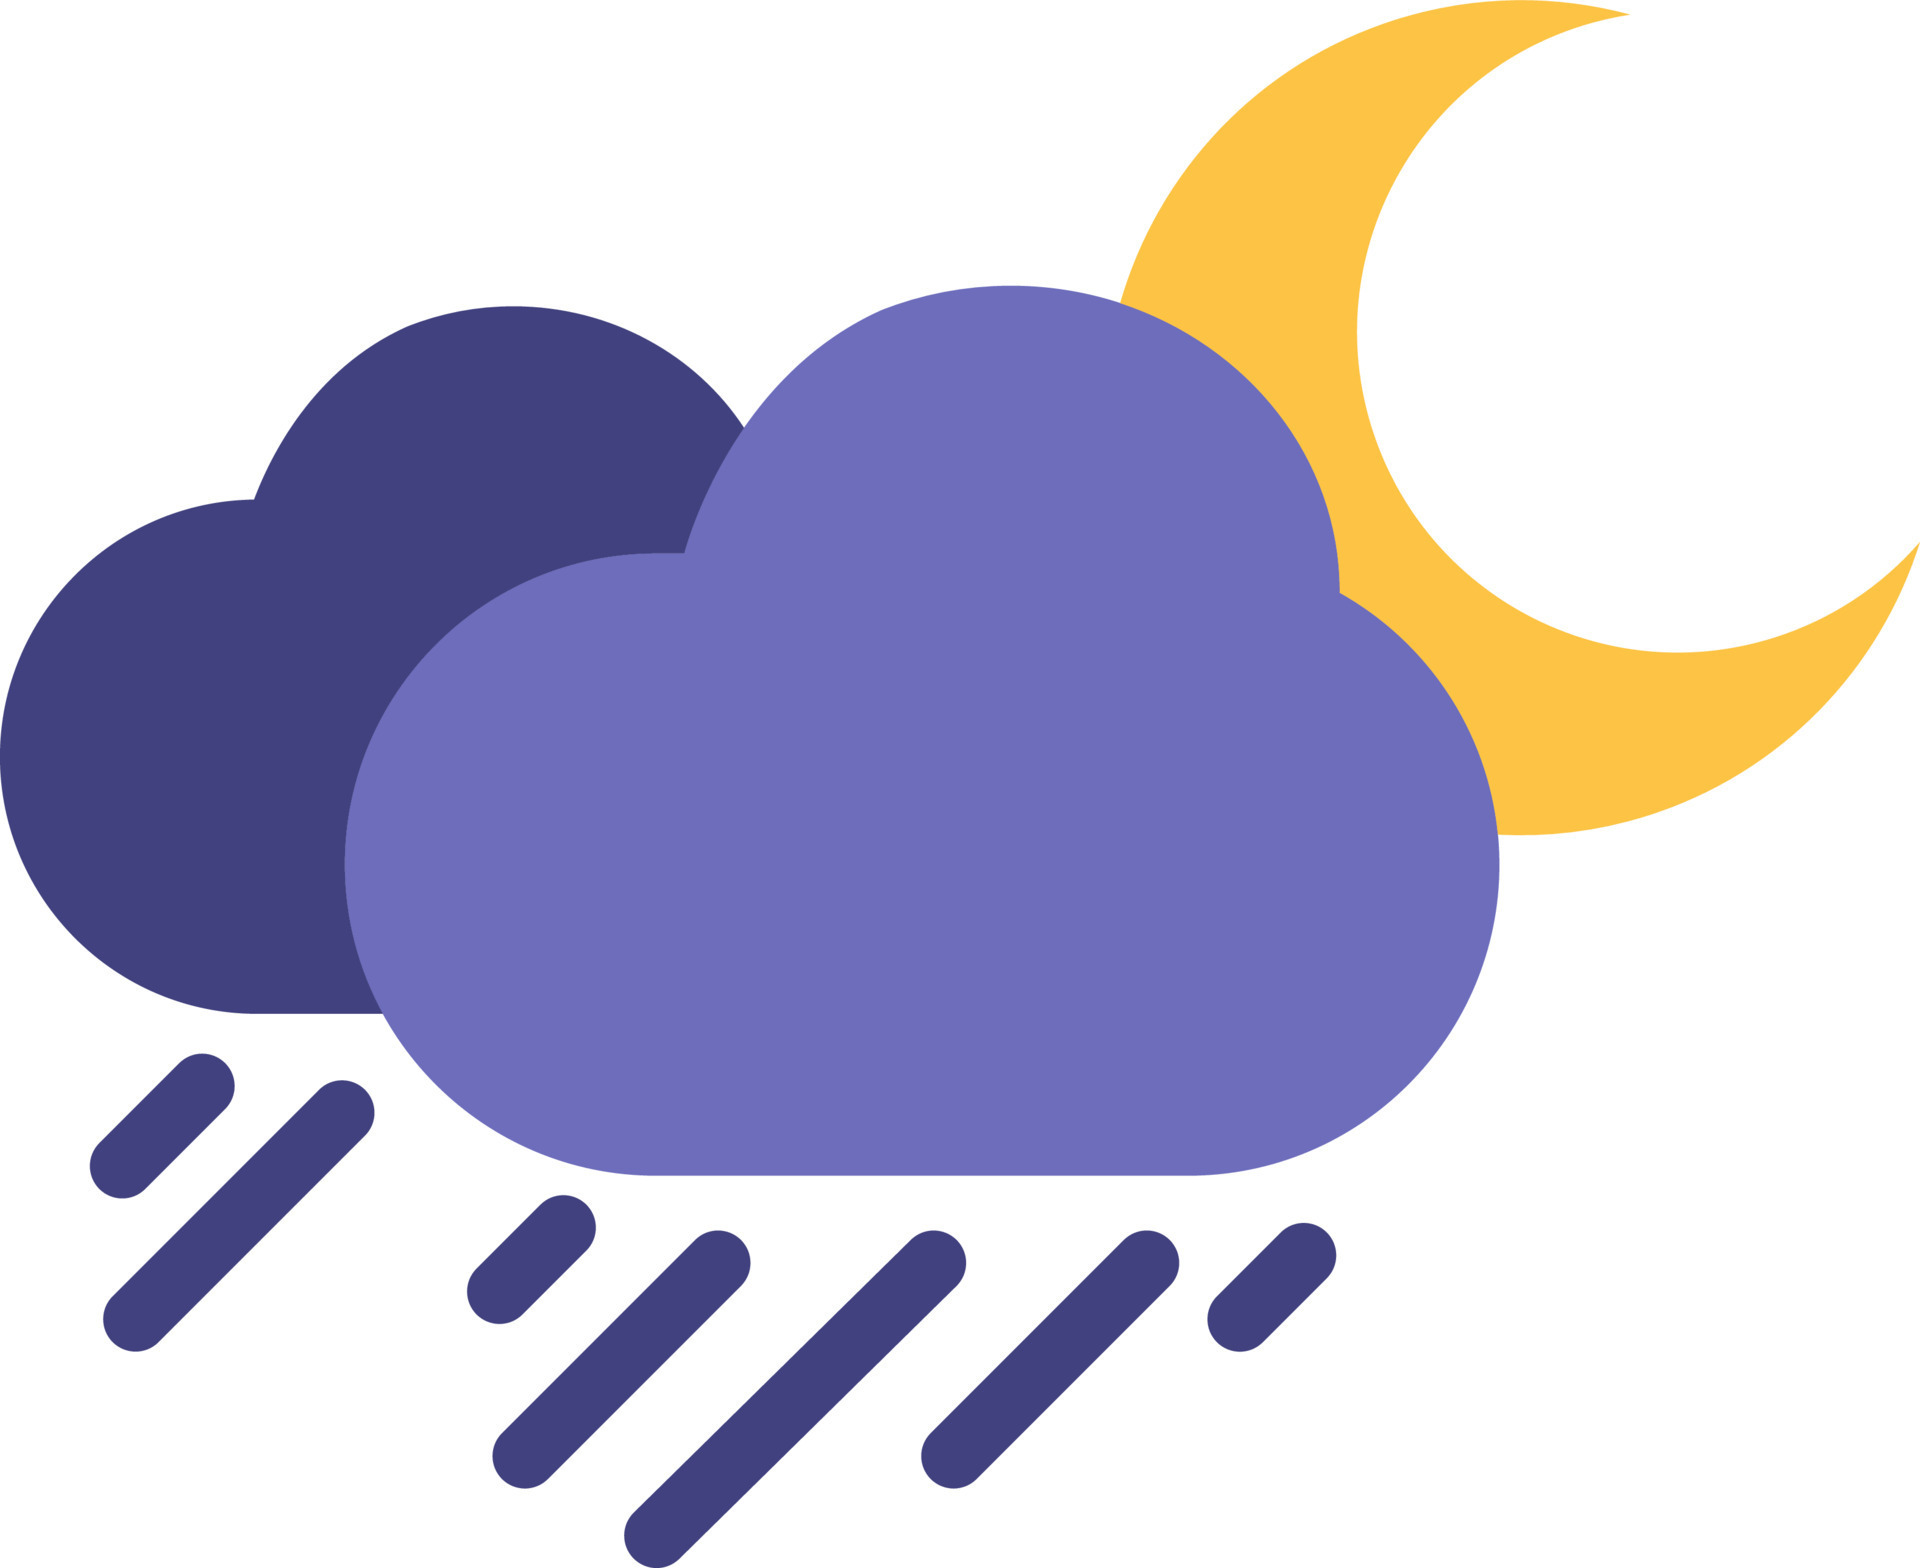 Night with rainy clouds, illustration, vector on white background ...